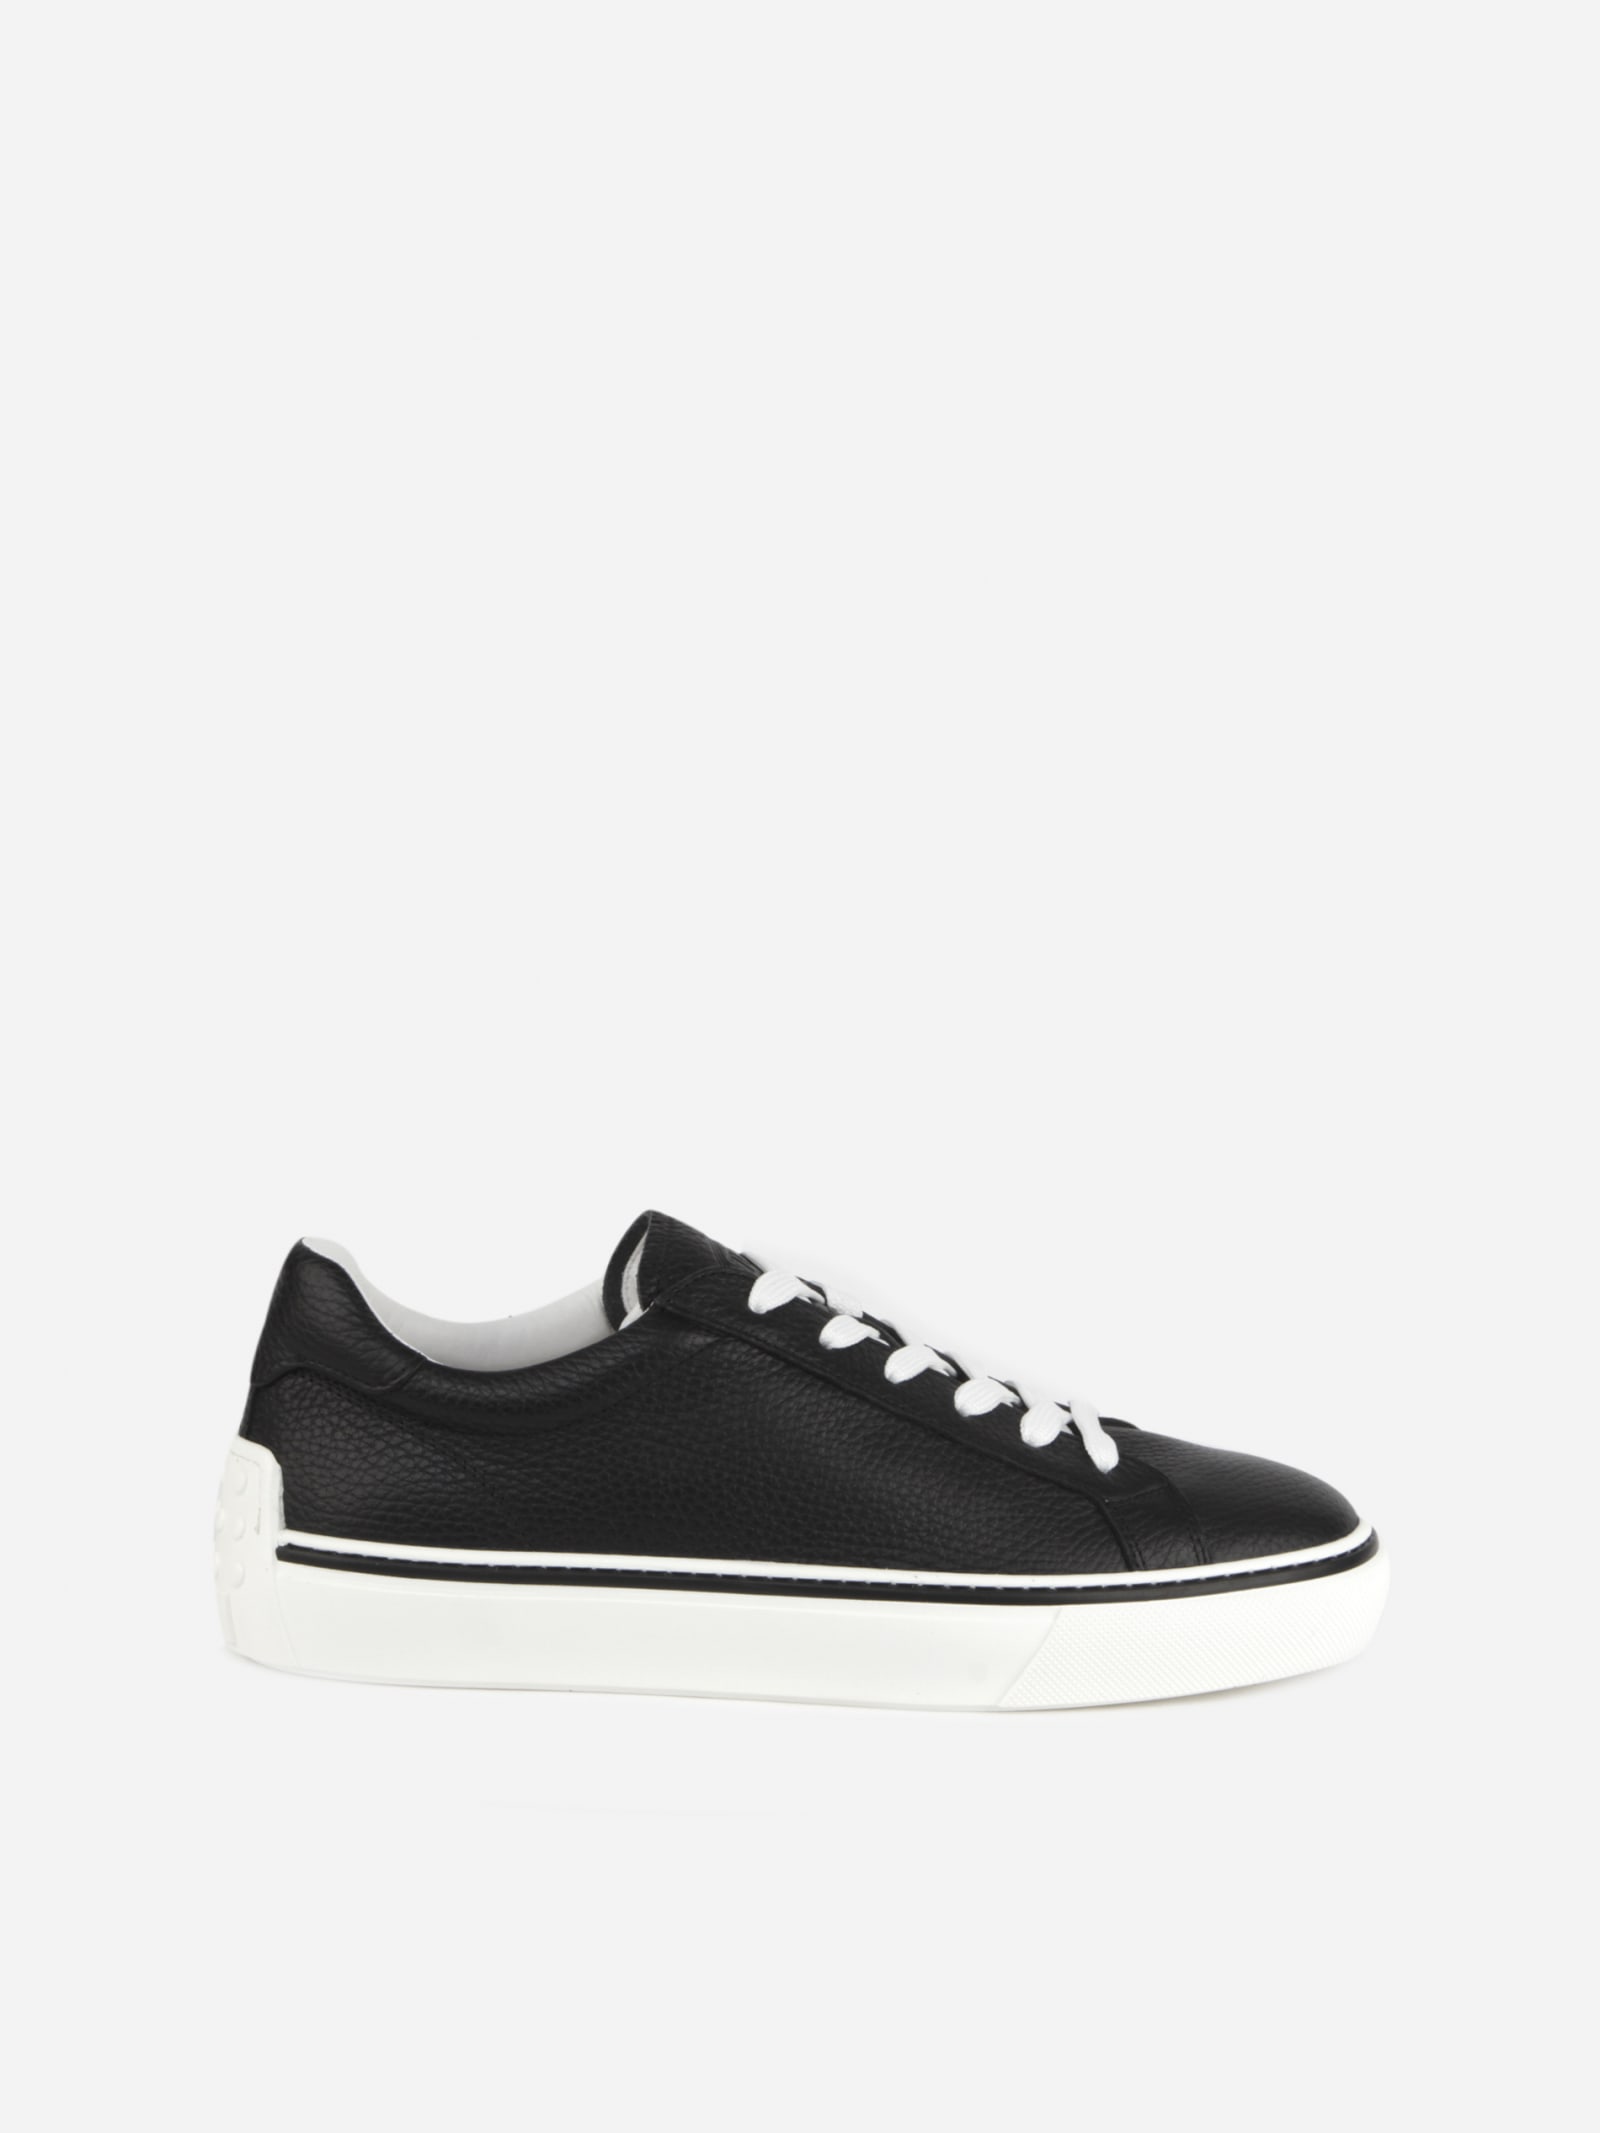 Tods Hammered Leather Sneakers With Contrasting Profiles